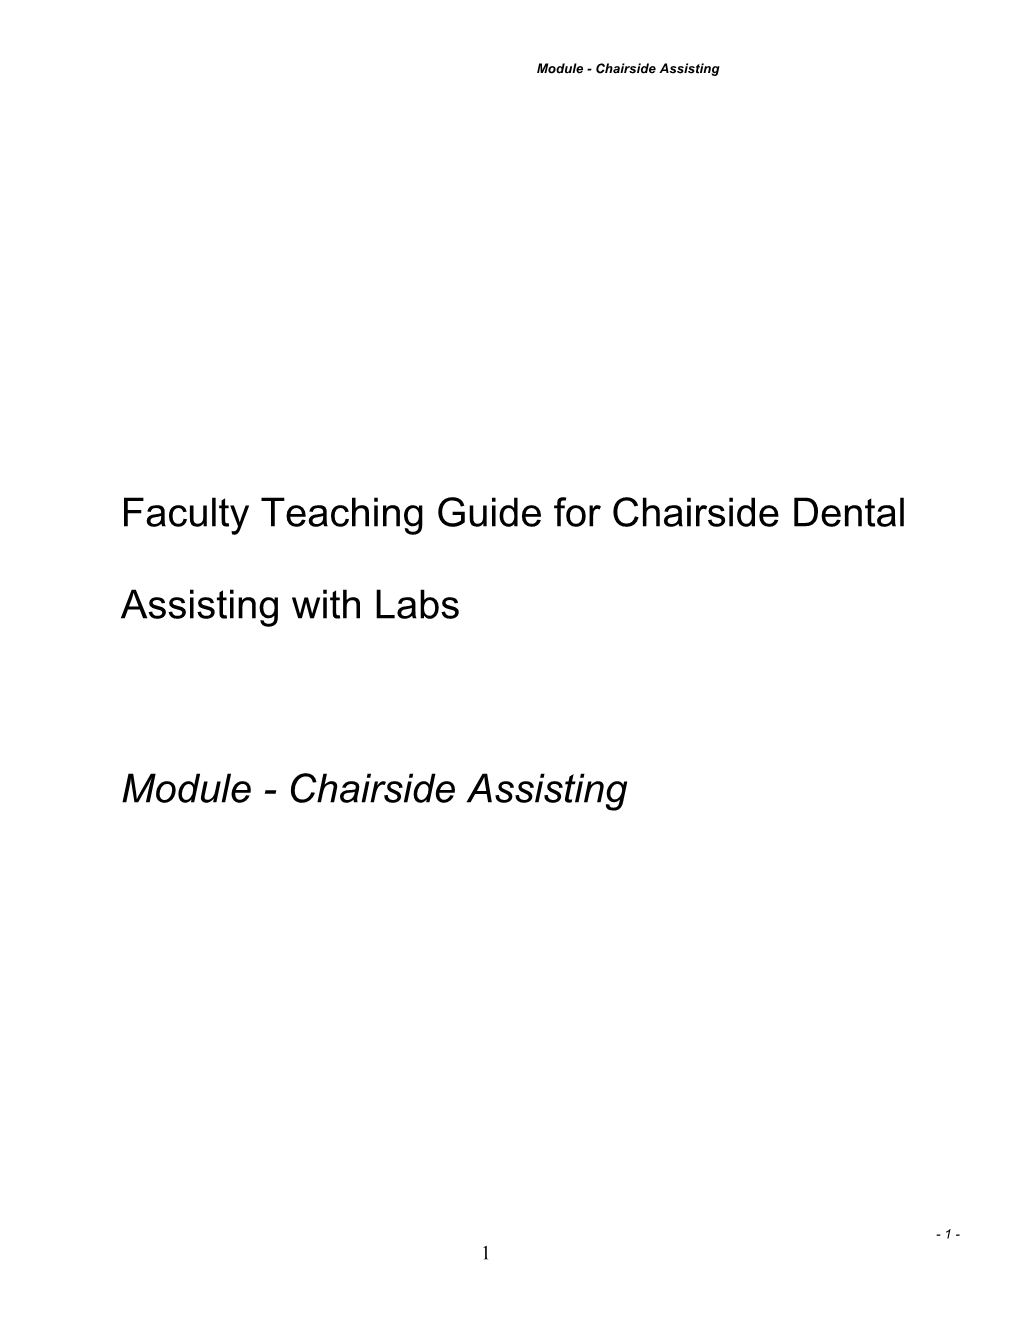 Module - Chairside Assisting